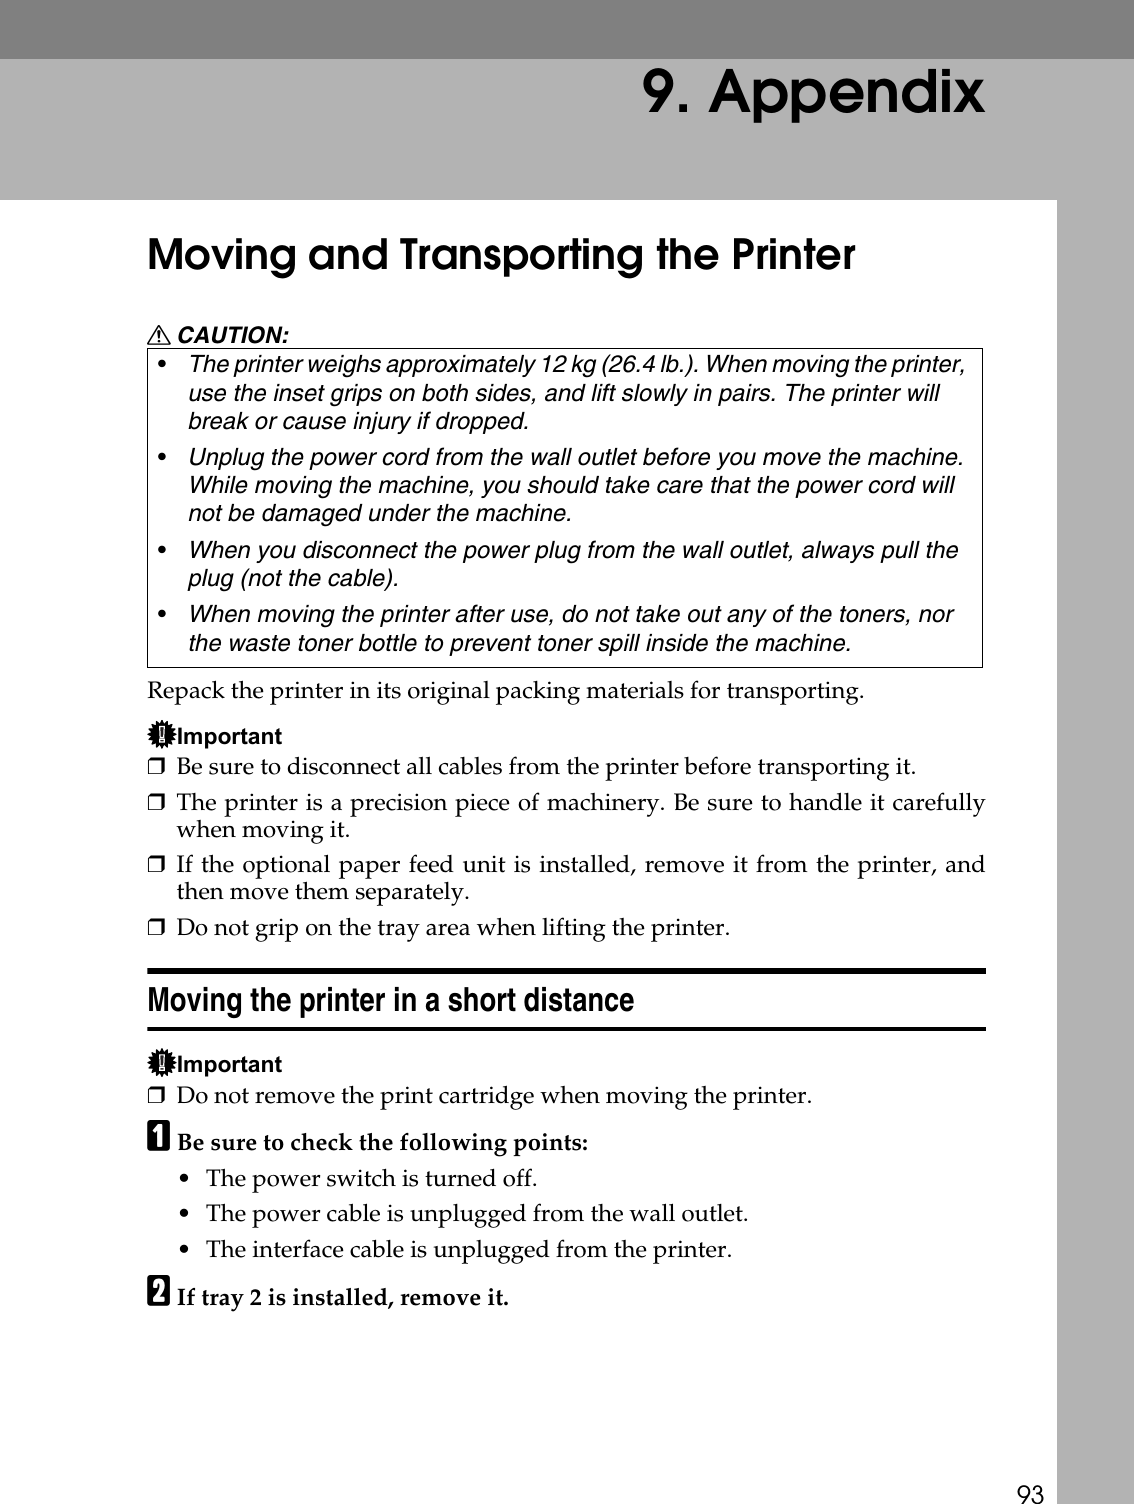 939. AppendixMoving and Transporting the PrinterR CAUTION:Repack the printer in its original packing materials for transporting.Important❒Be sure to disconnect all cables from the printer before transporting it.❒The printer is a precision piece of machinery. Be sure to handle it carefullywhen moving it.❒If the optional paper feed unit is installed, remove it from the printer, andthen move them separately.❒Do not grip on the tray area when lifting the printer.Moving the printer in a short distanceImportant❒Do not remove the print cartridge when moving the printer.ABe sure to check the following points:• The power switch is turned off.• The power cable is unplugged from the wall outlet.• The interface cable is unplugged from the printer.BIf tray 2 is installed, remove it.•The printer weighs approximately 12 kg (26.4 lb.). When moving the printer, use the inset grips on both sides, and lift slowly in pairs. The printer will break or cause injury if dropped.•Unplug the power cord from the wall outlet before you move the machine. While moving the machine, you should take care that the power cord will not be damaged under the machine.•When you disconnect the power plug from the wall outlet, always pull the plug (not the cable).•When moving the printer after use, do not take out any of the toners, nor the waste toner bottle to prevent toner spill inside the machine.